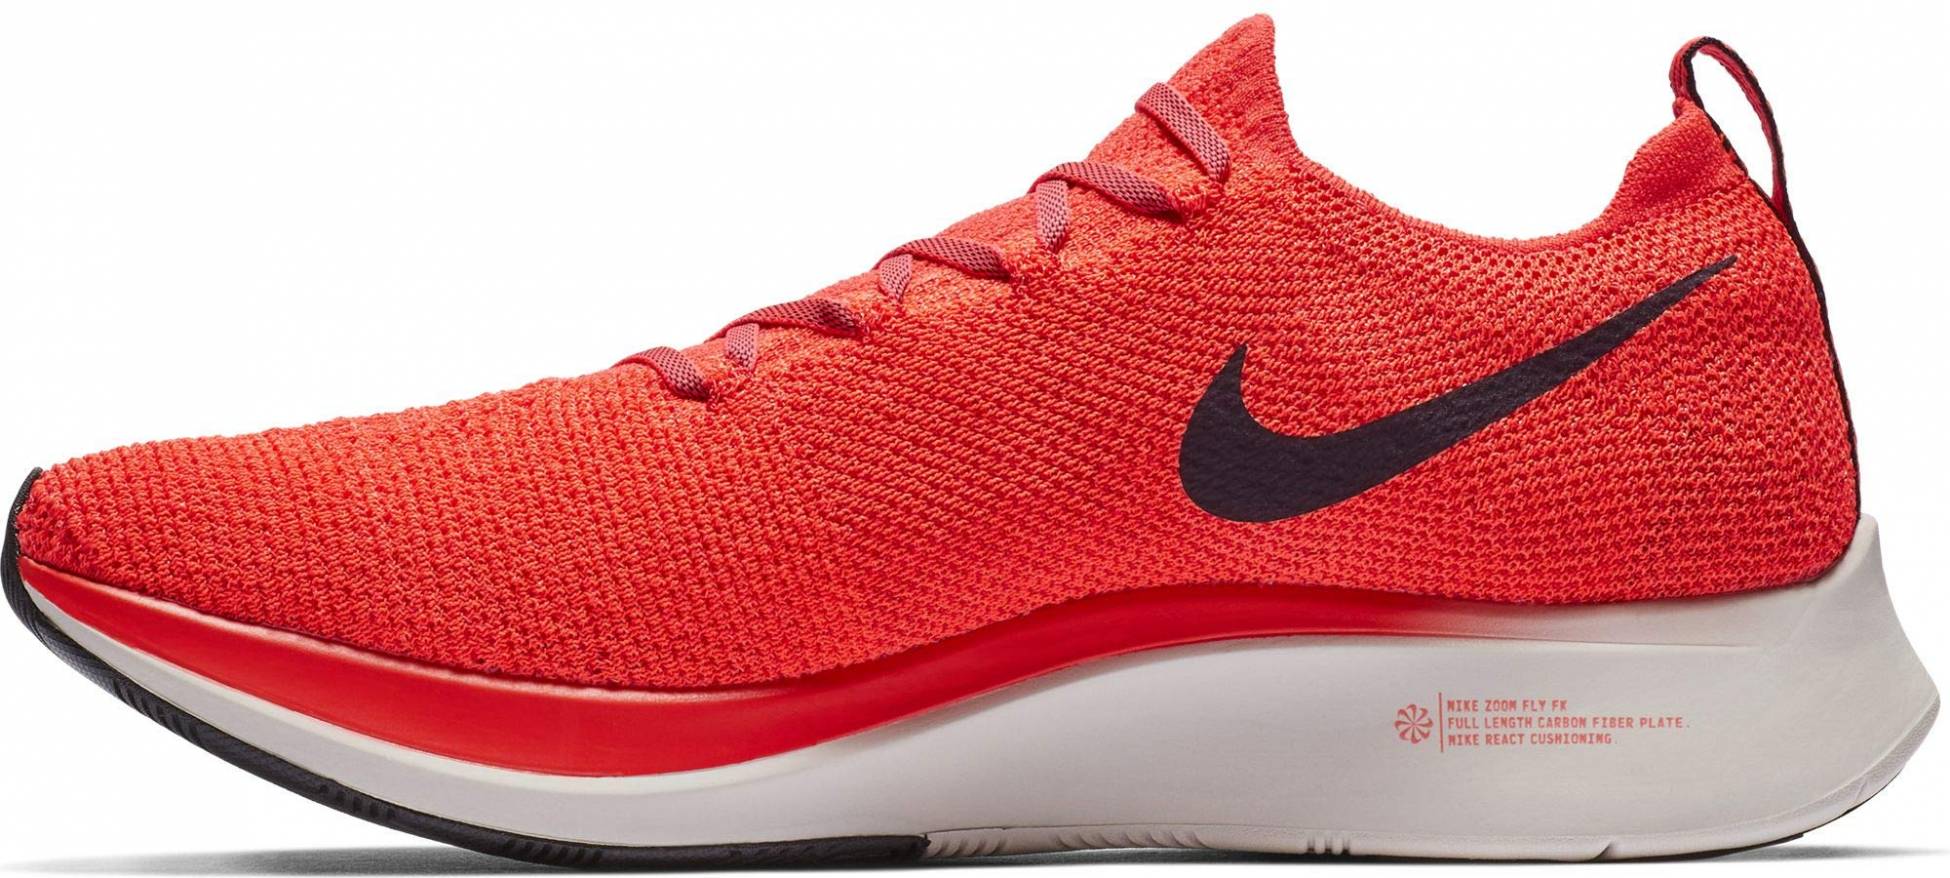 Nike Zoom Fly Flyknit Review 2022, Facts, Deals | RunRepeat دوتاش اون لاين